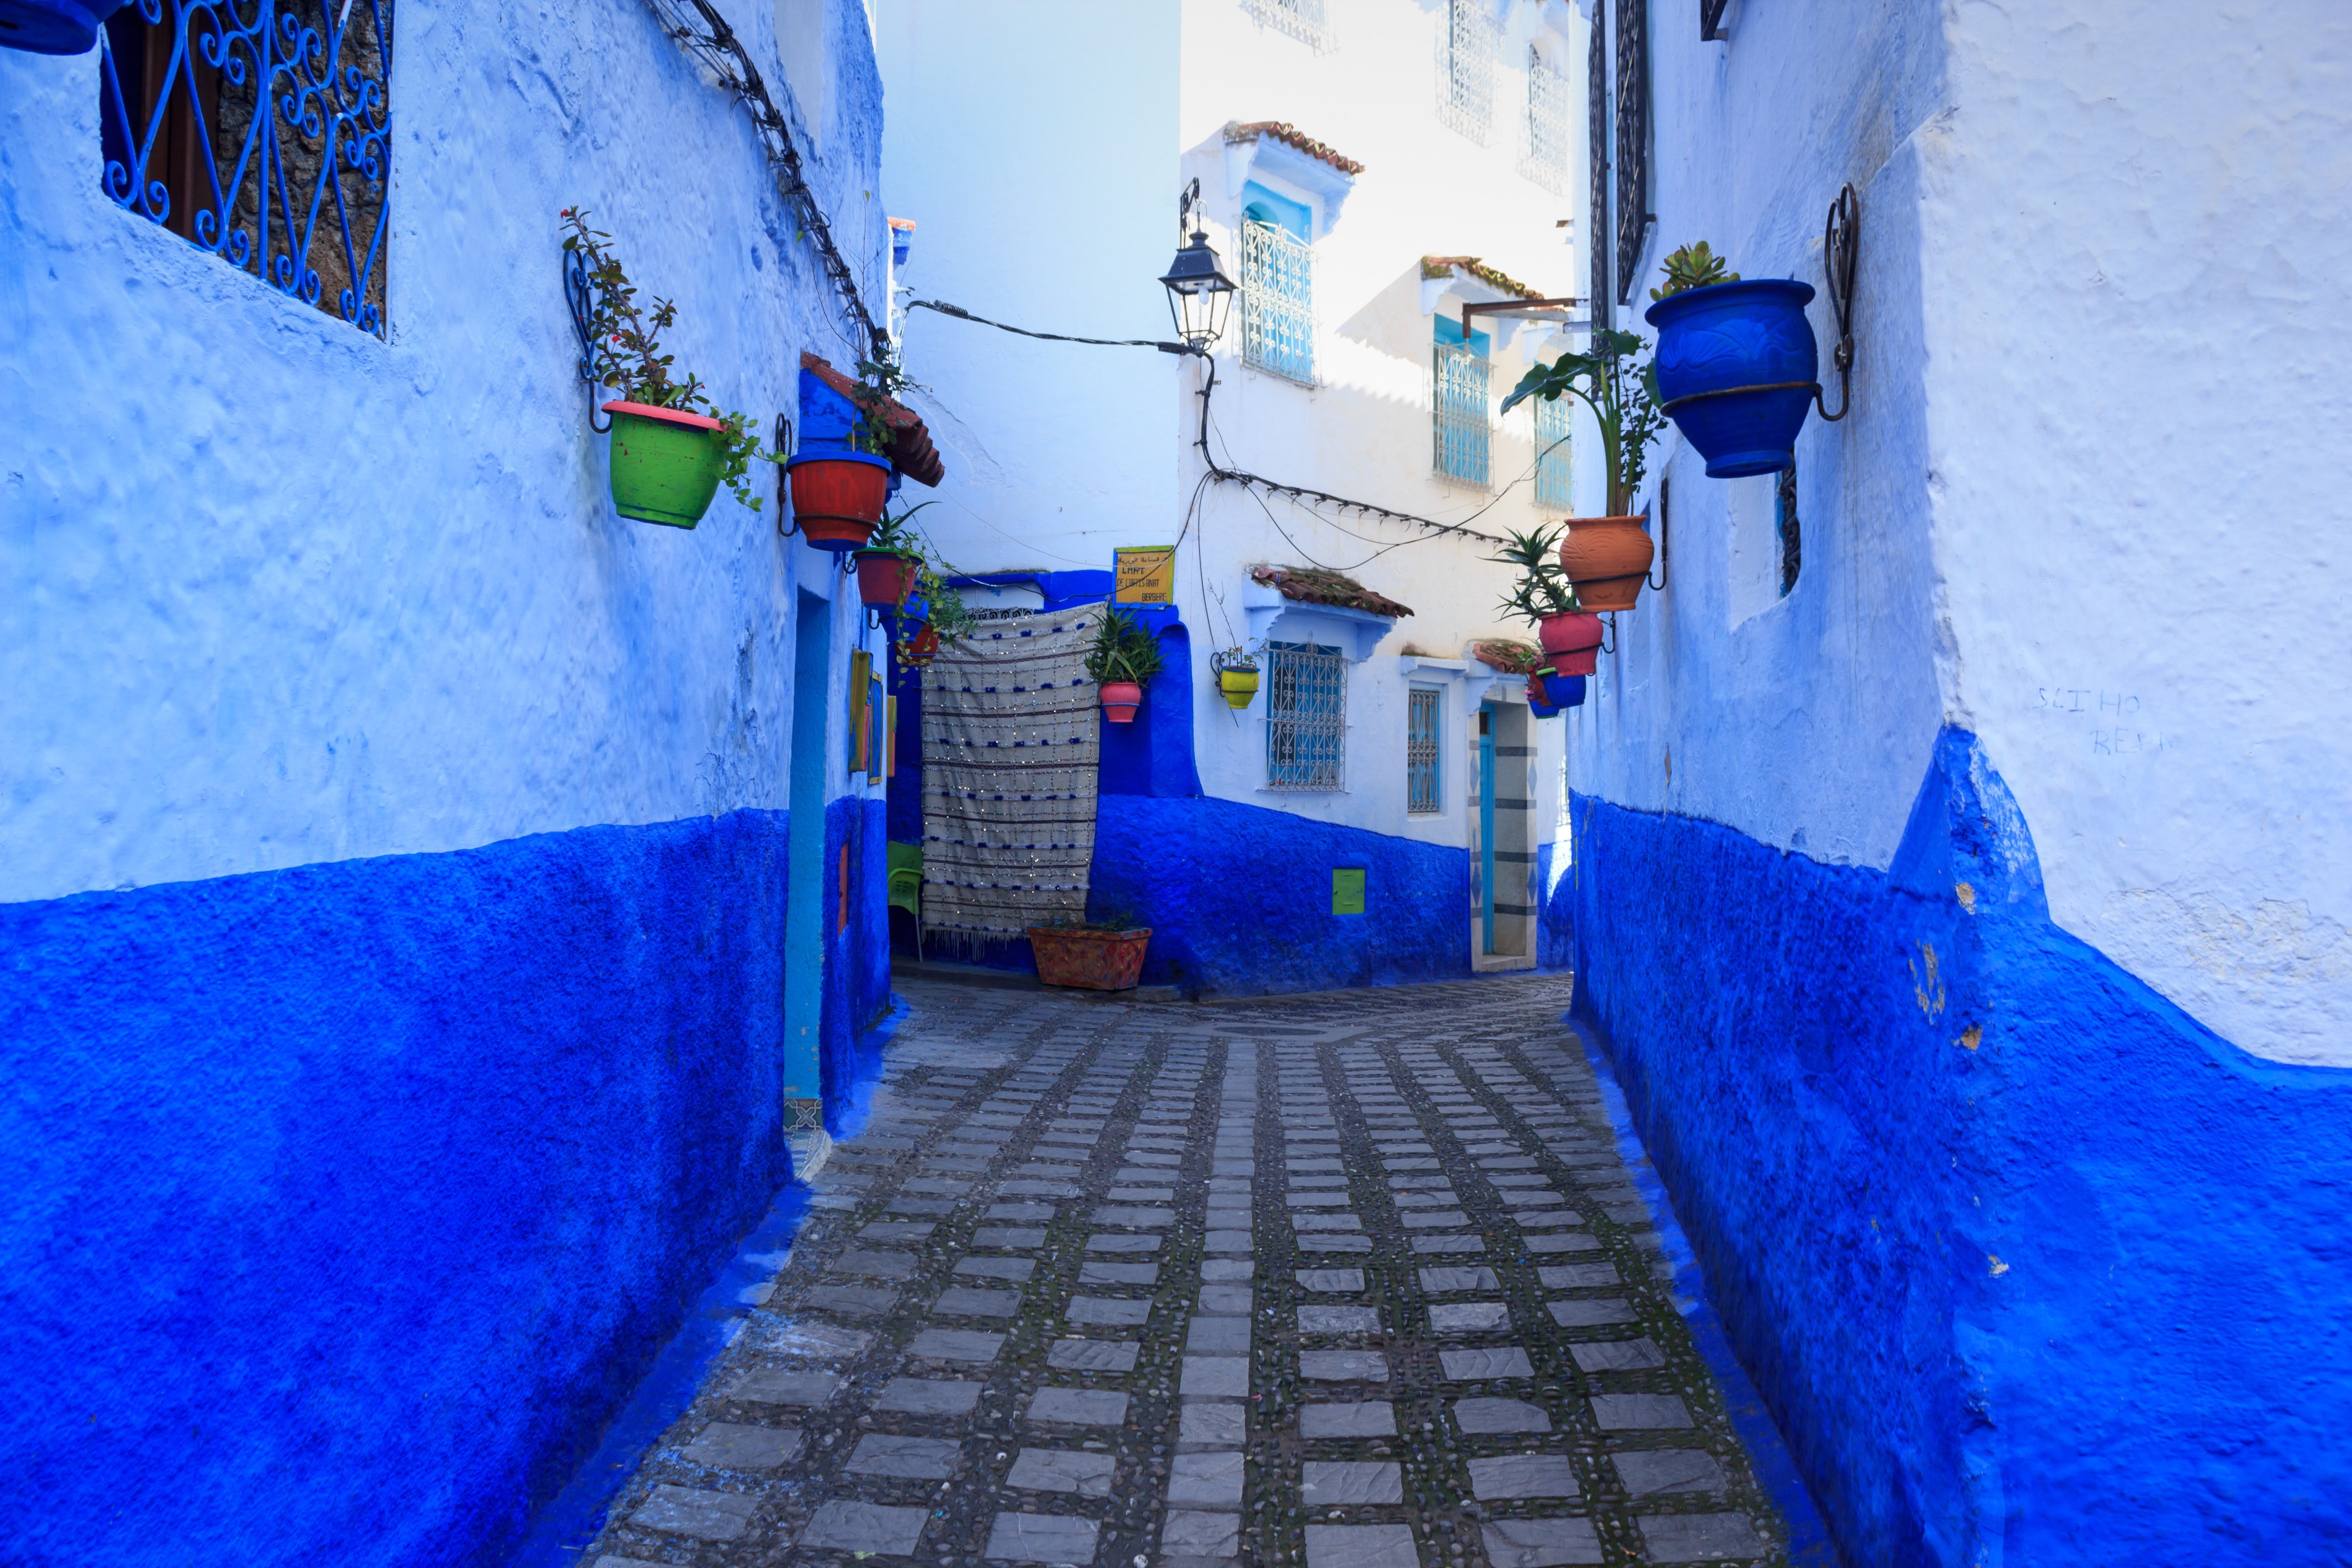 The blue city in Morocco.